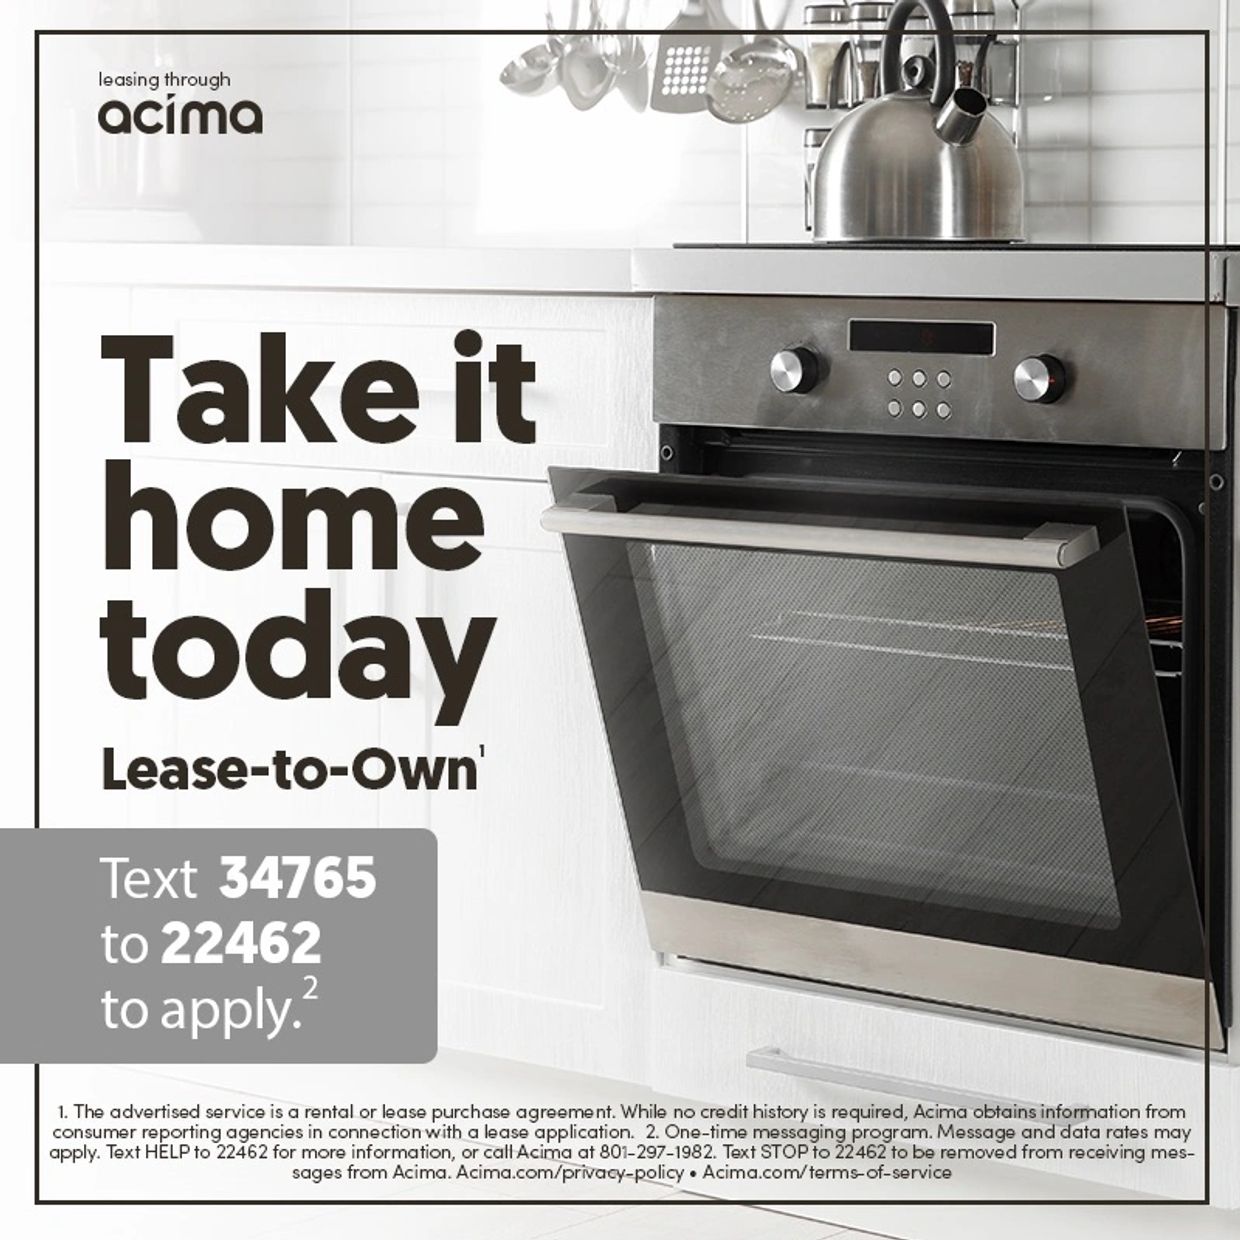 Acima offers lease-to-own options with no credit check.